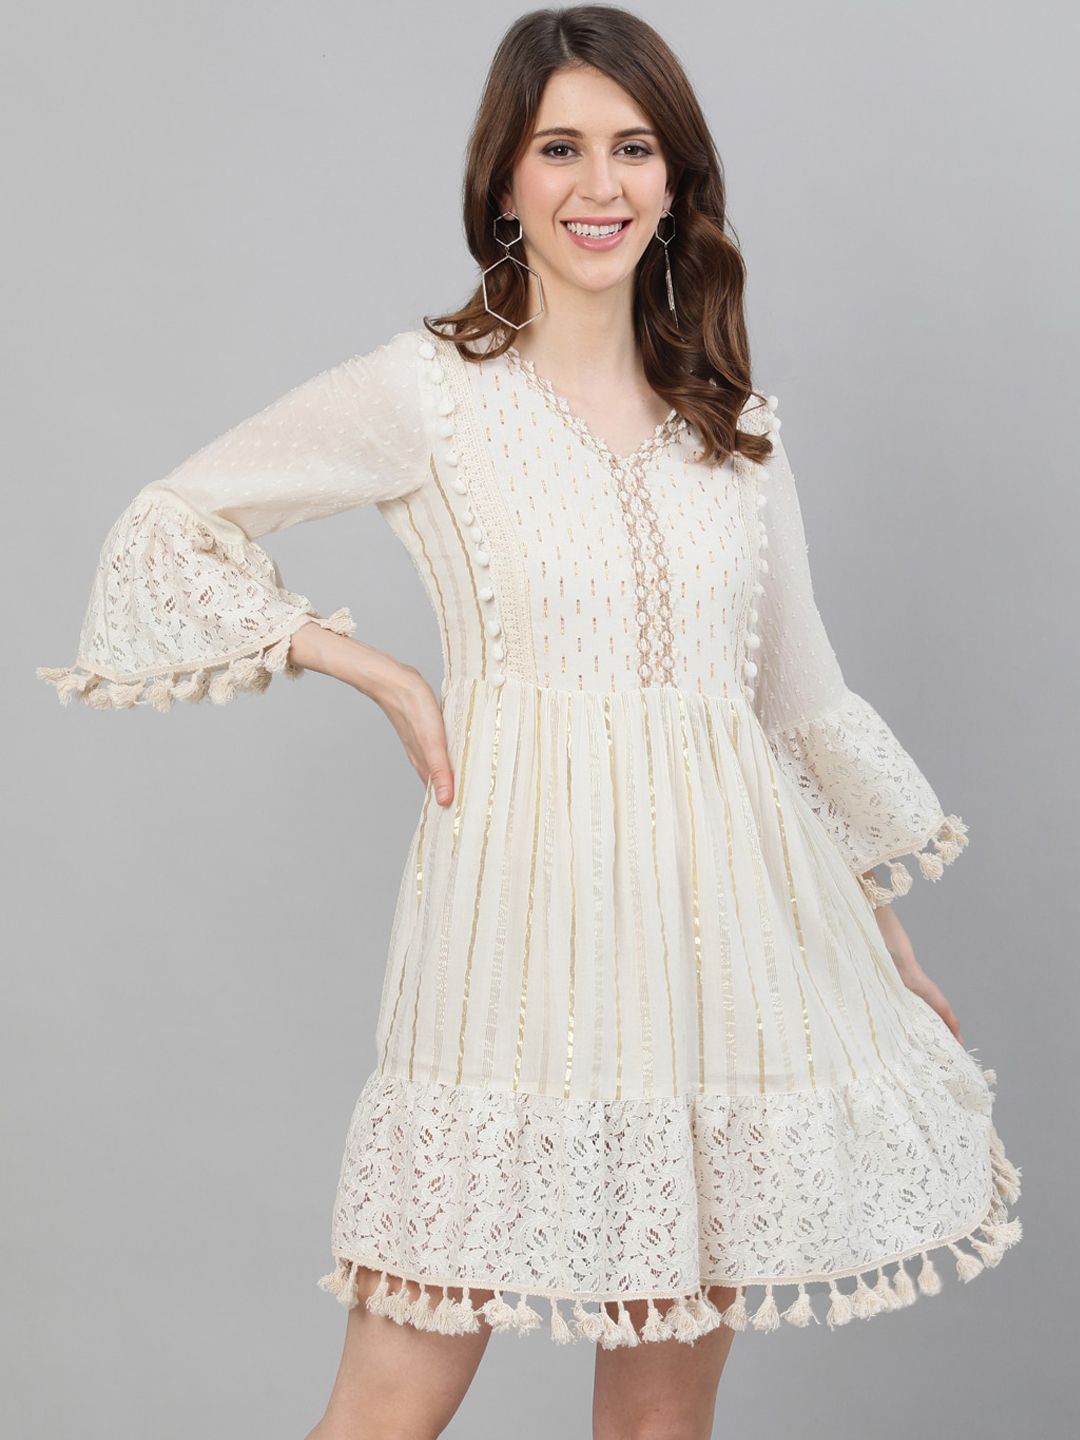 Ishin Off-White Self Design Fit and Flare Dress Price in India